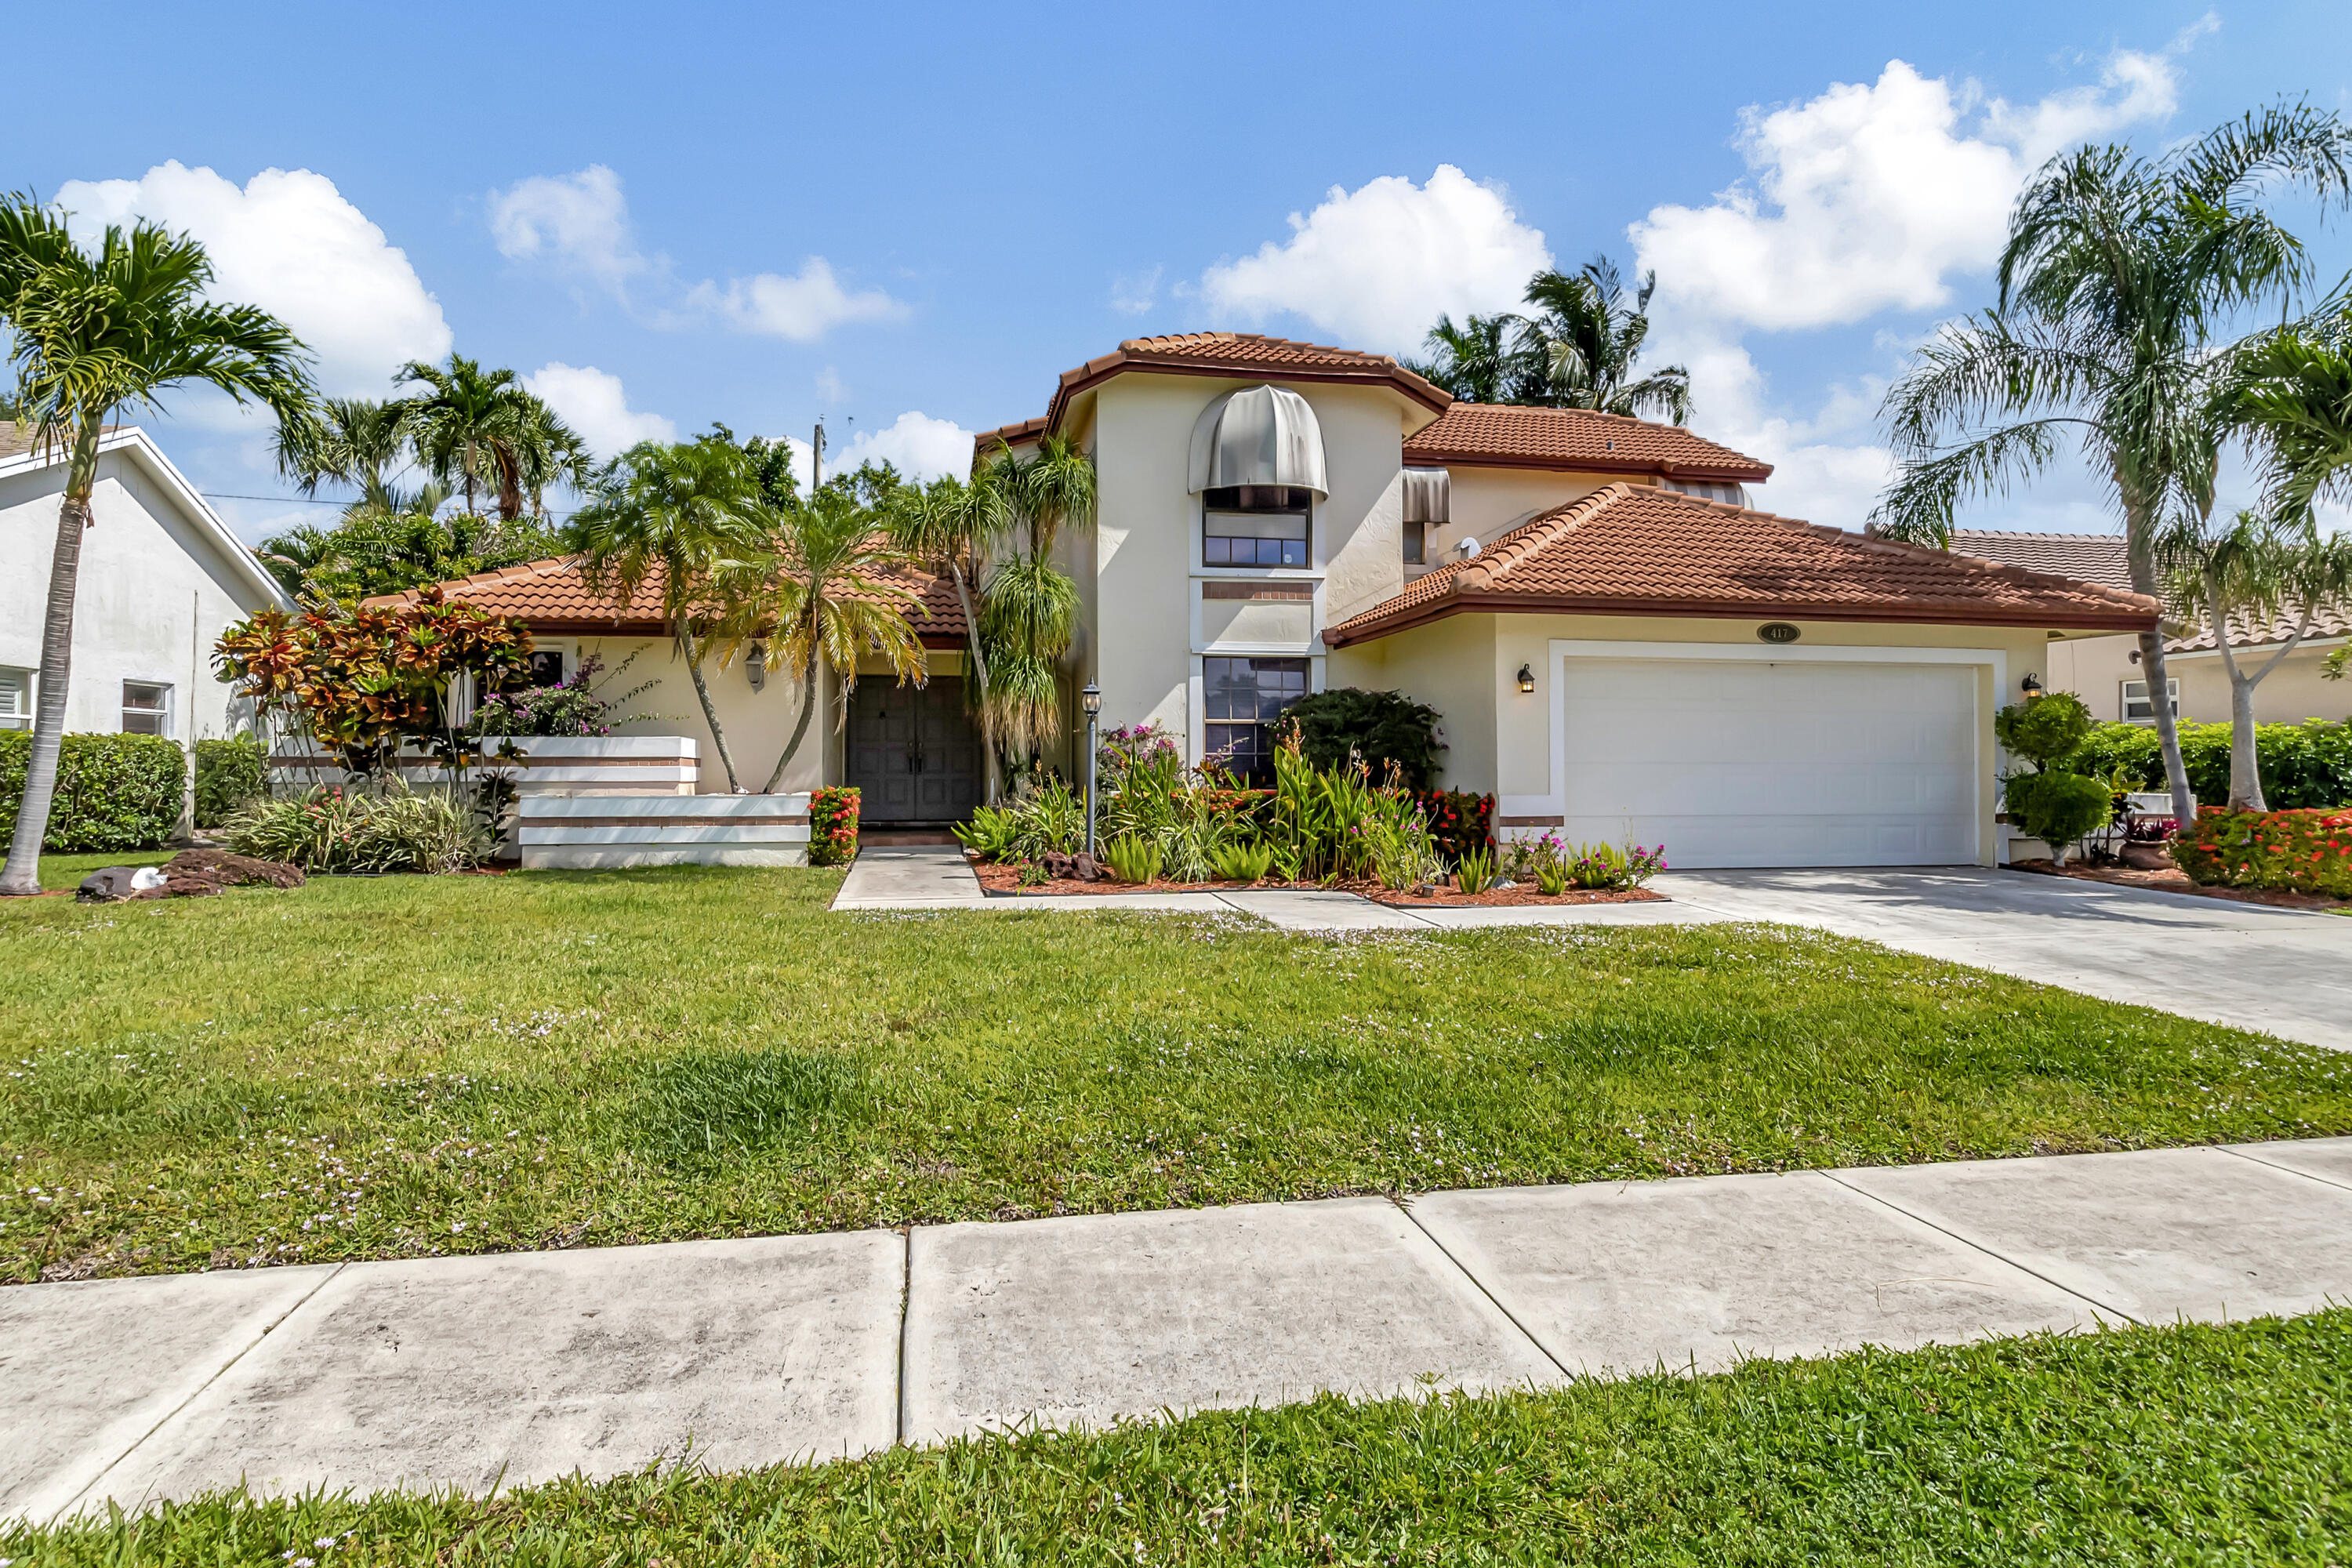 Property for Sale at 417 Mohawk Lane, Boca Raton, Palm Beach County, Florida - Bedrooms: 4 
Bathrooms: 3.5  - $1,100,000